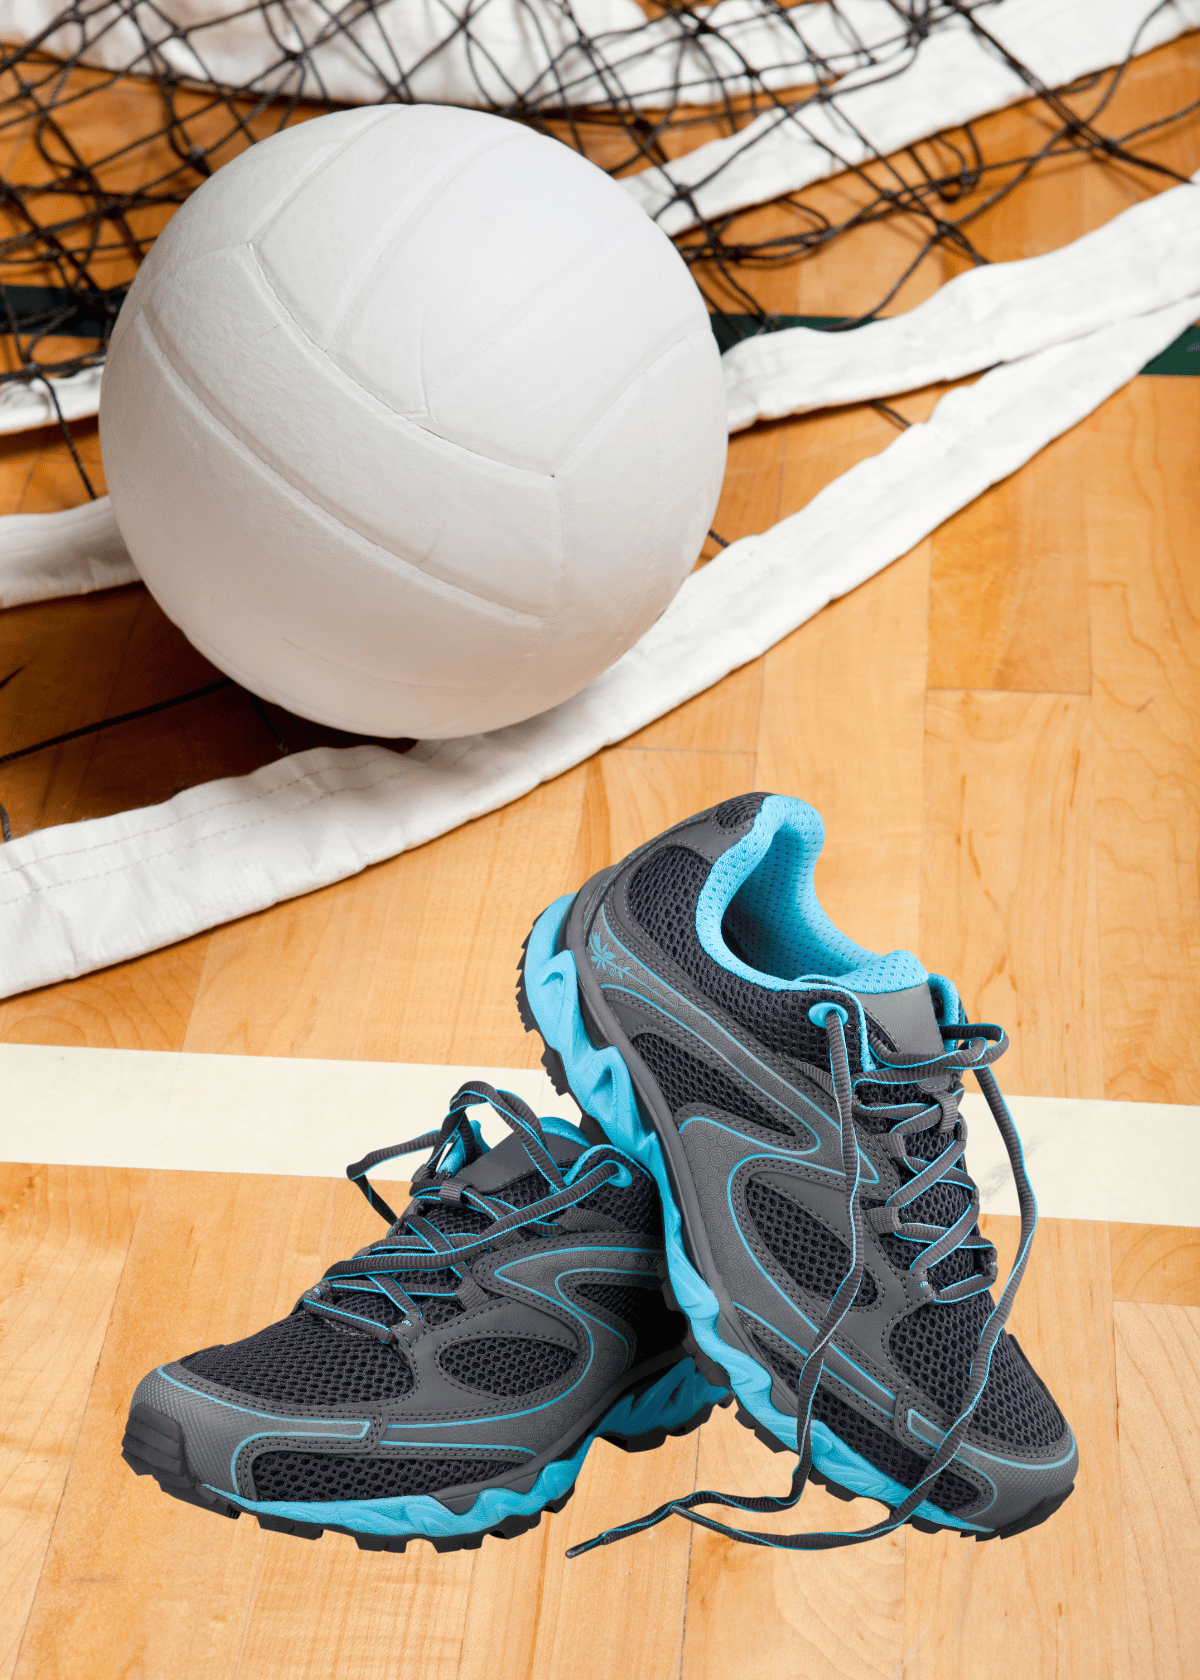 Game On: Best Volleyball Shoes for Women to Dominate the Court